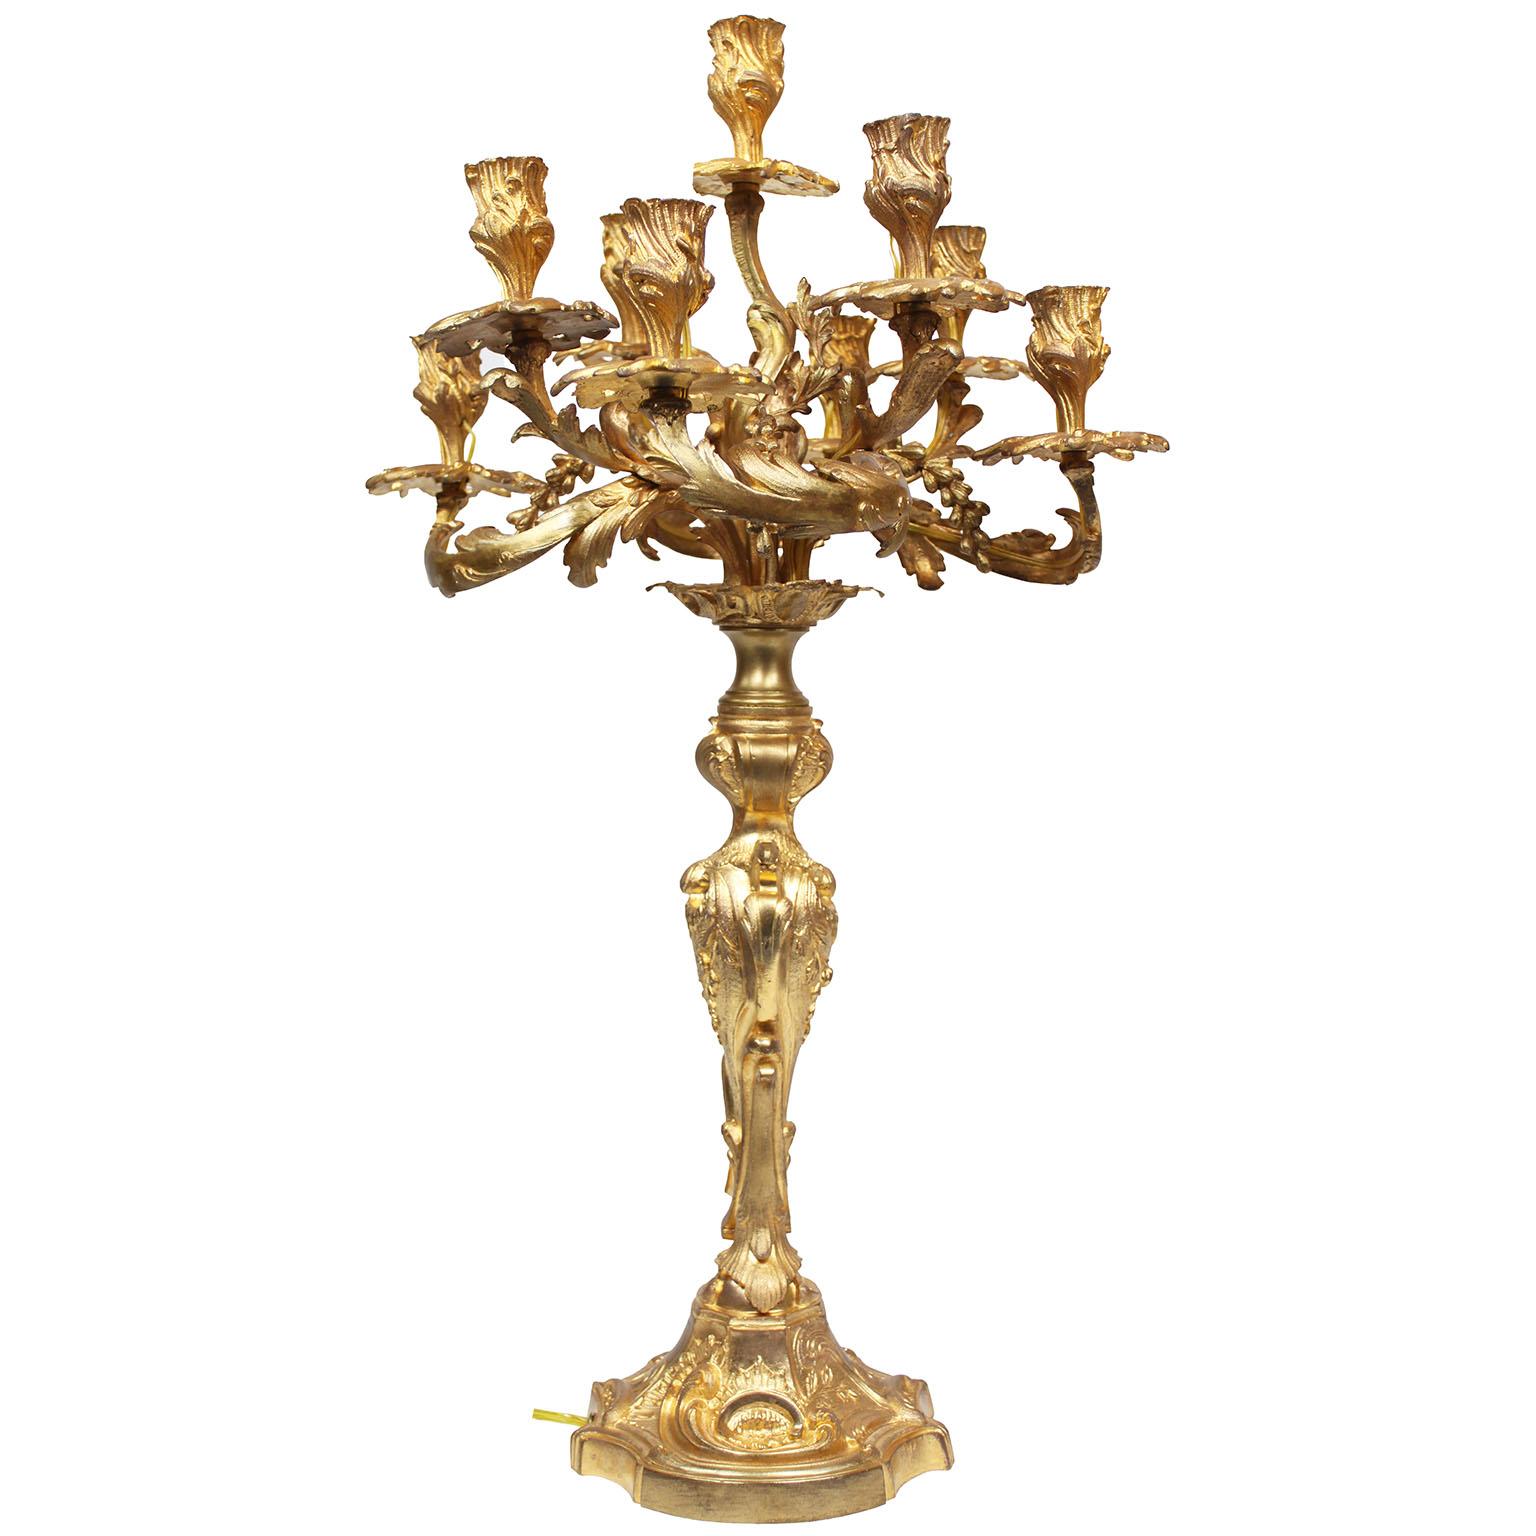 A Pair of French 19th Century Louis XV Style Gilt-Bronze Nine-Light Candelabra For Sale 2